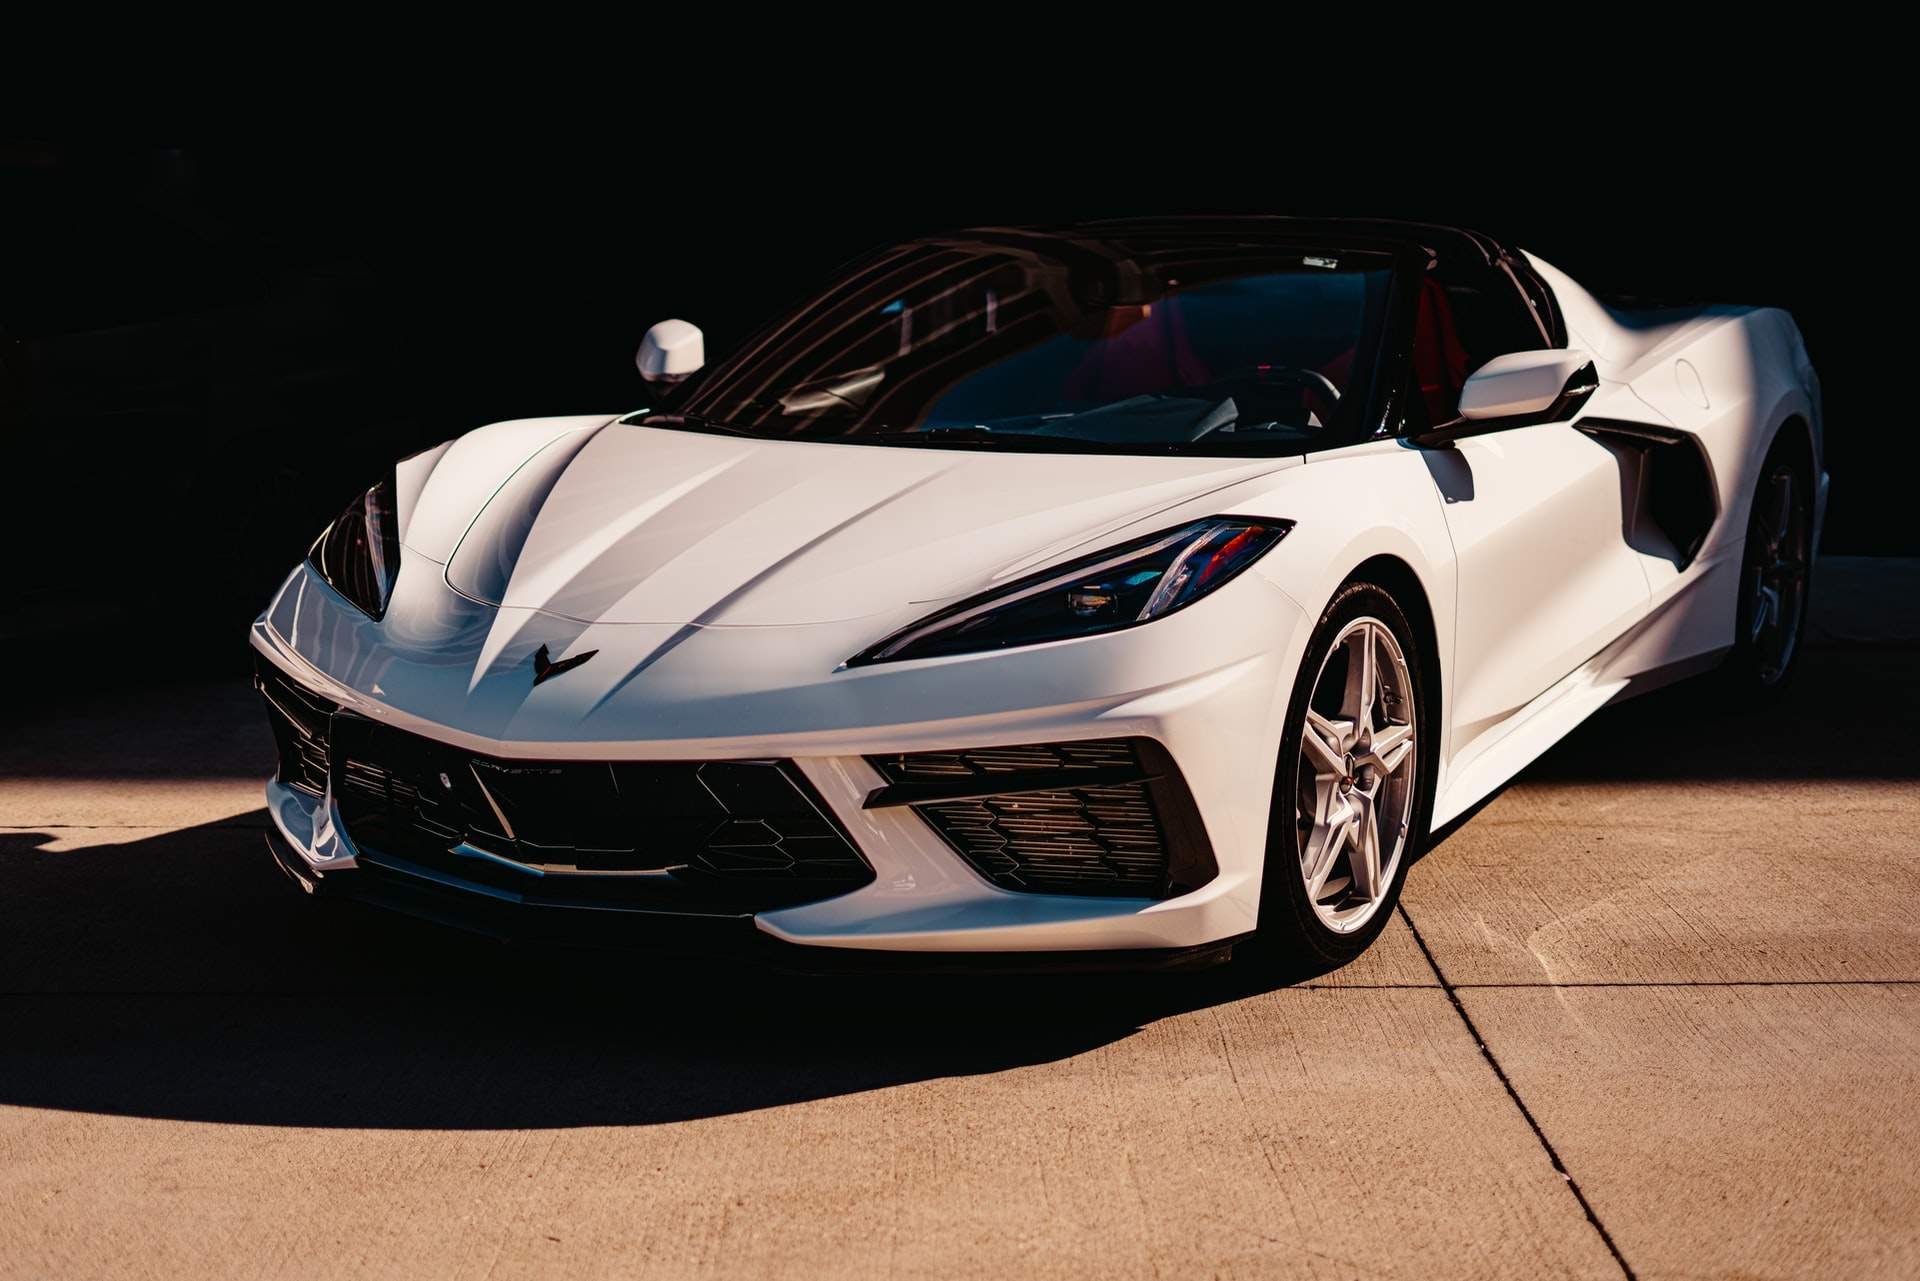 Chevrolet Corvette Rolls Into Production May 9th